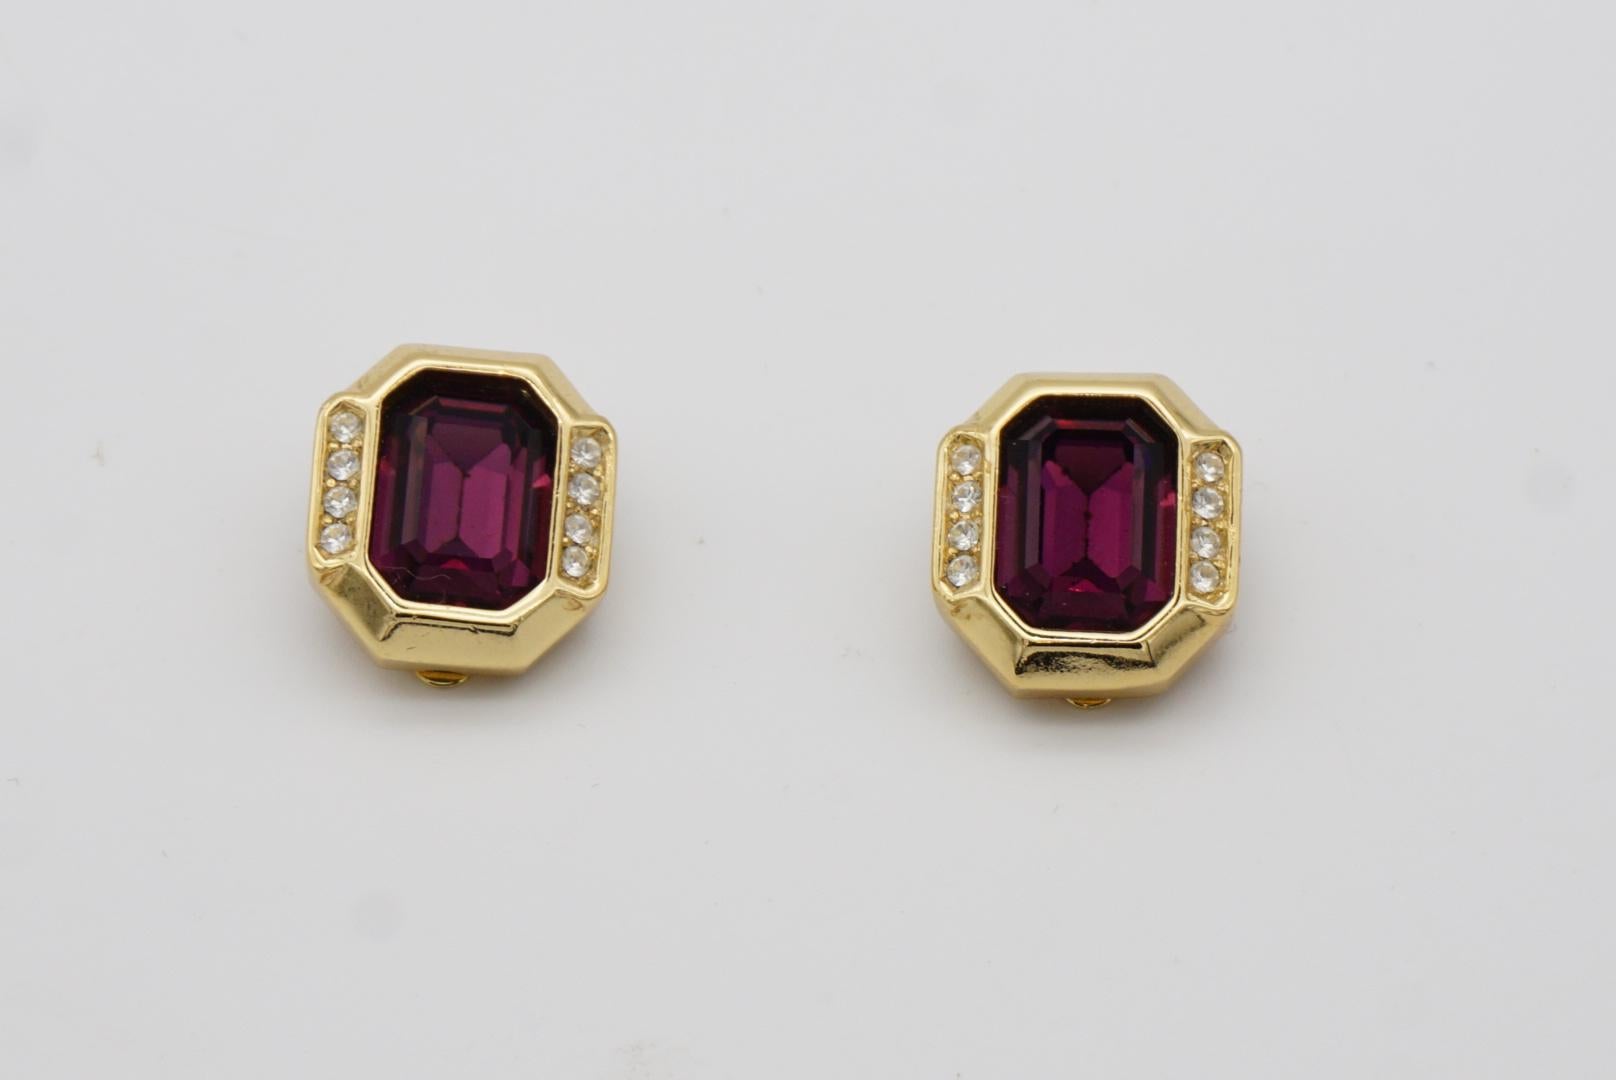 Christian Dior Vintage 1980s Amethyst Purple Crystals Octagonal Clip Earrings For Sale 3